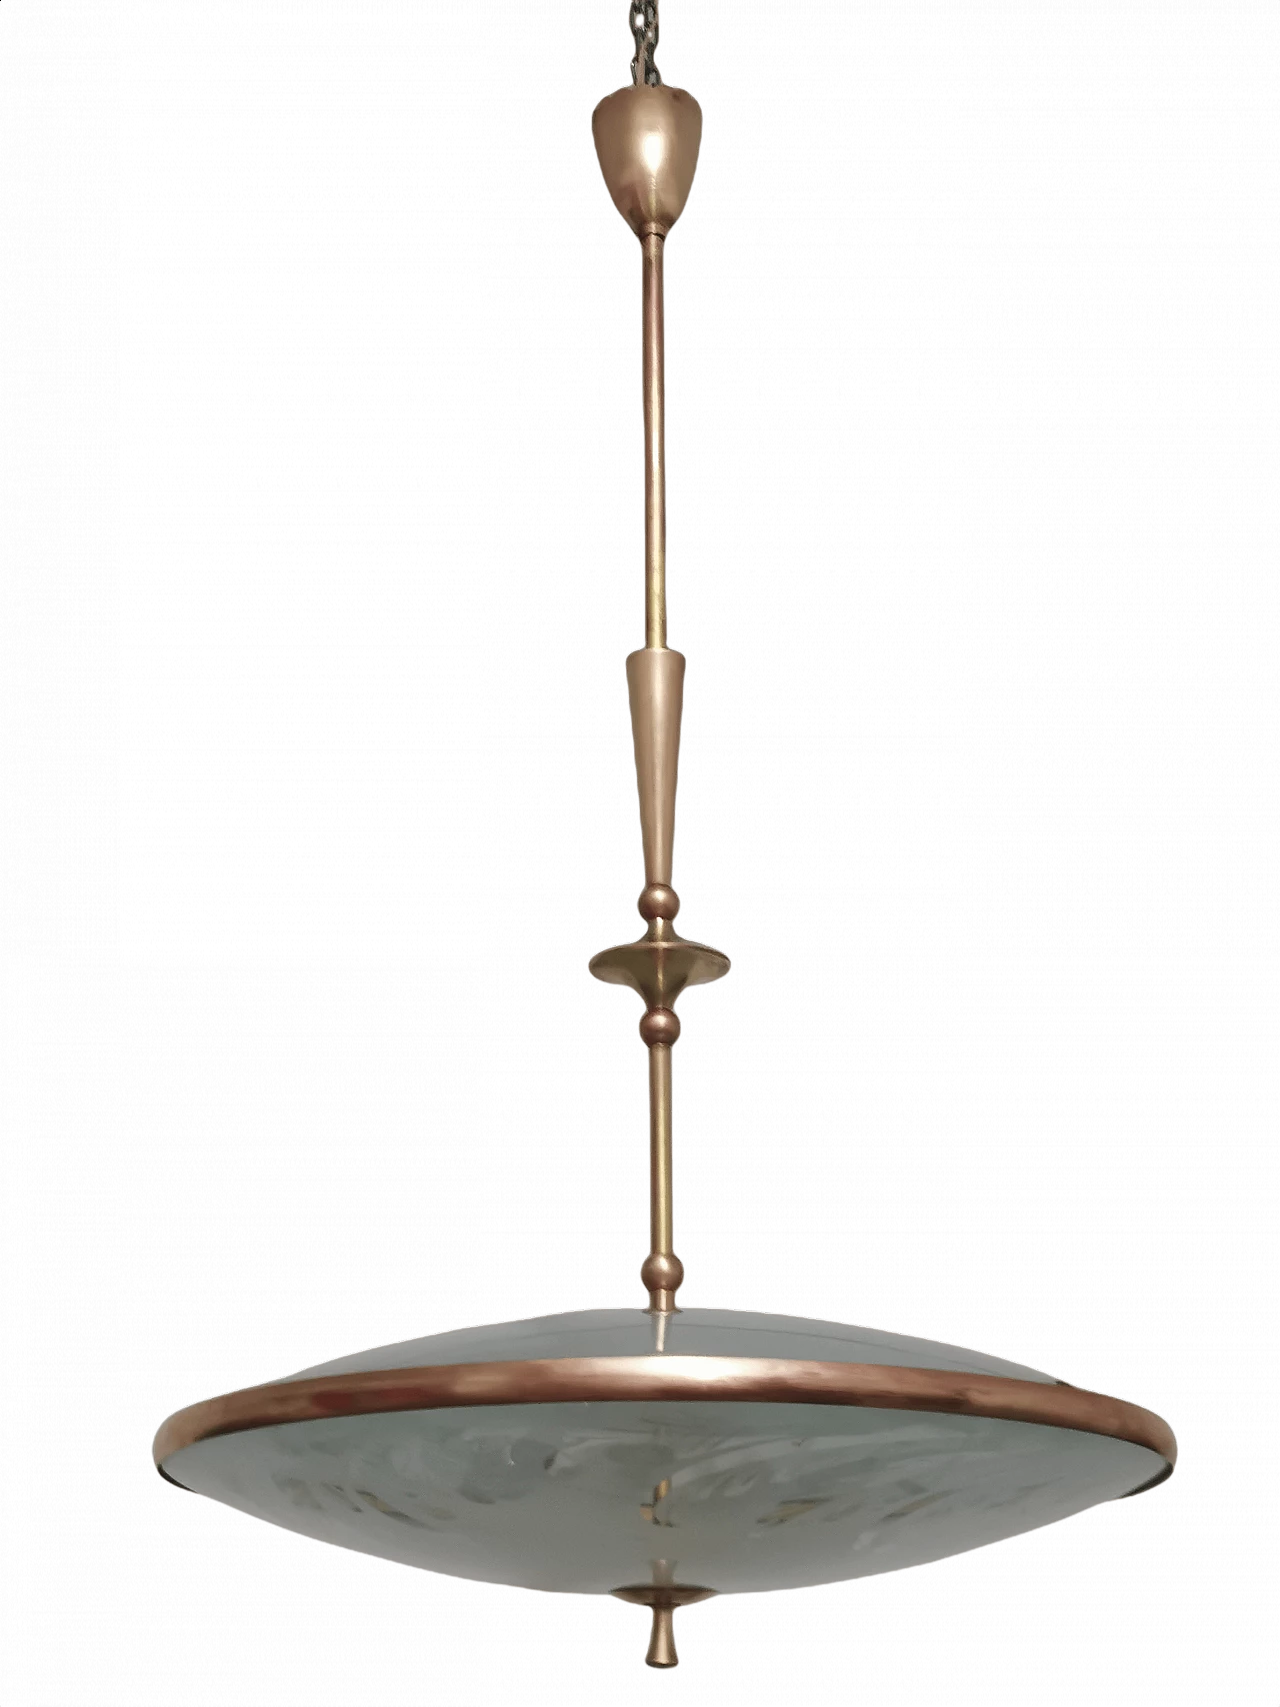 Suspension lamp by Pietro Chiesa for Fontana Arte, 1940s 1372601